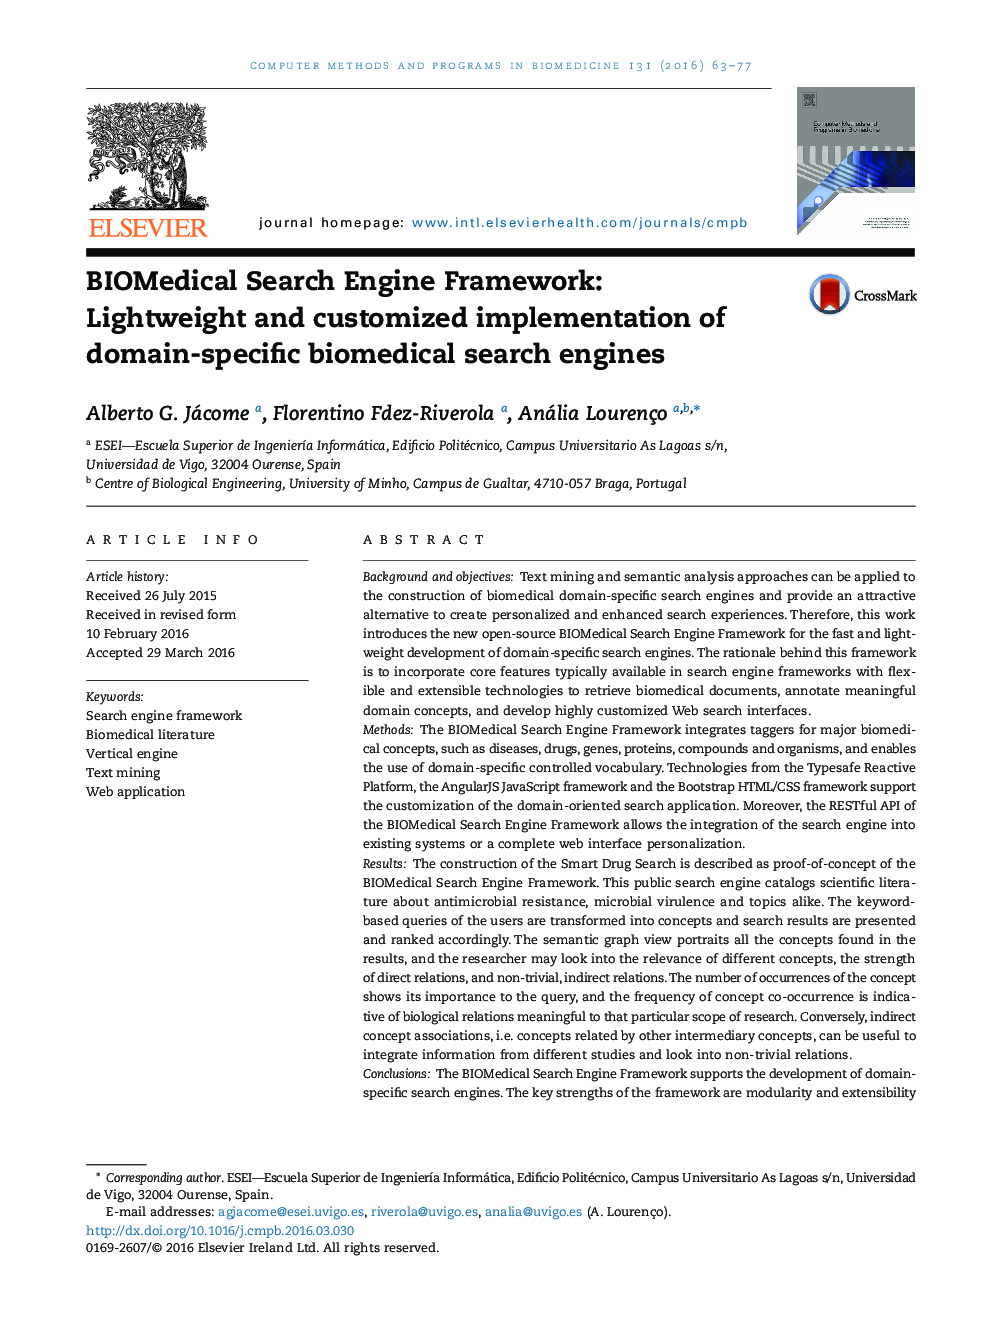 BIOMedical Search Engine Framework: Lightweight and customized implementation of domain-specific biomedical search engines